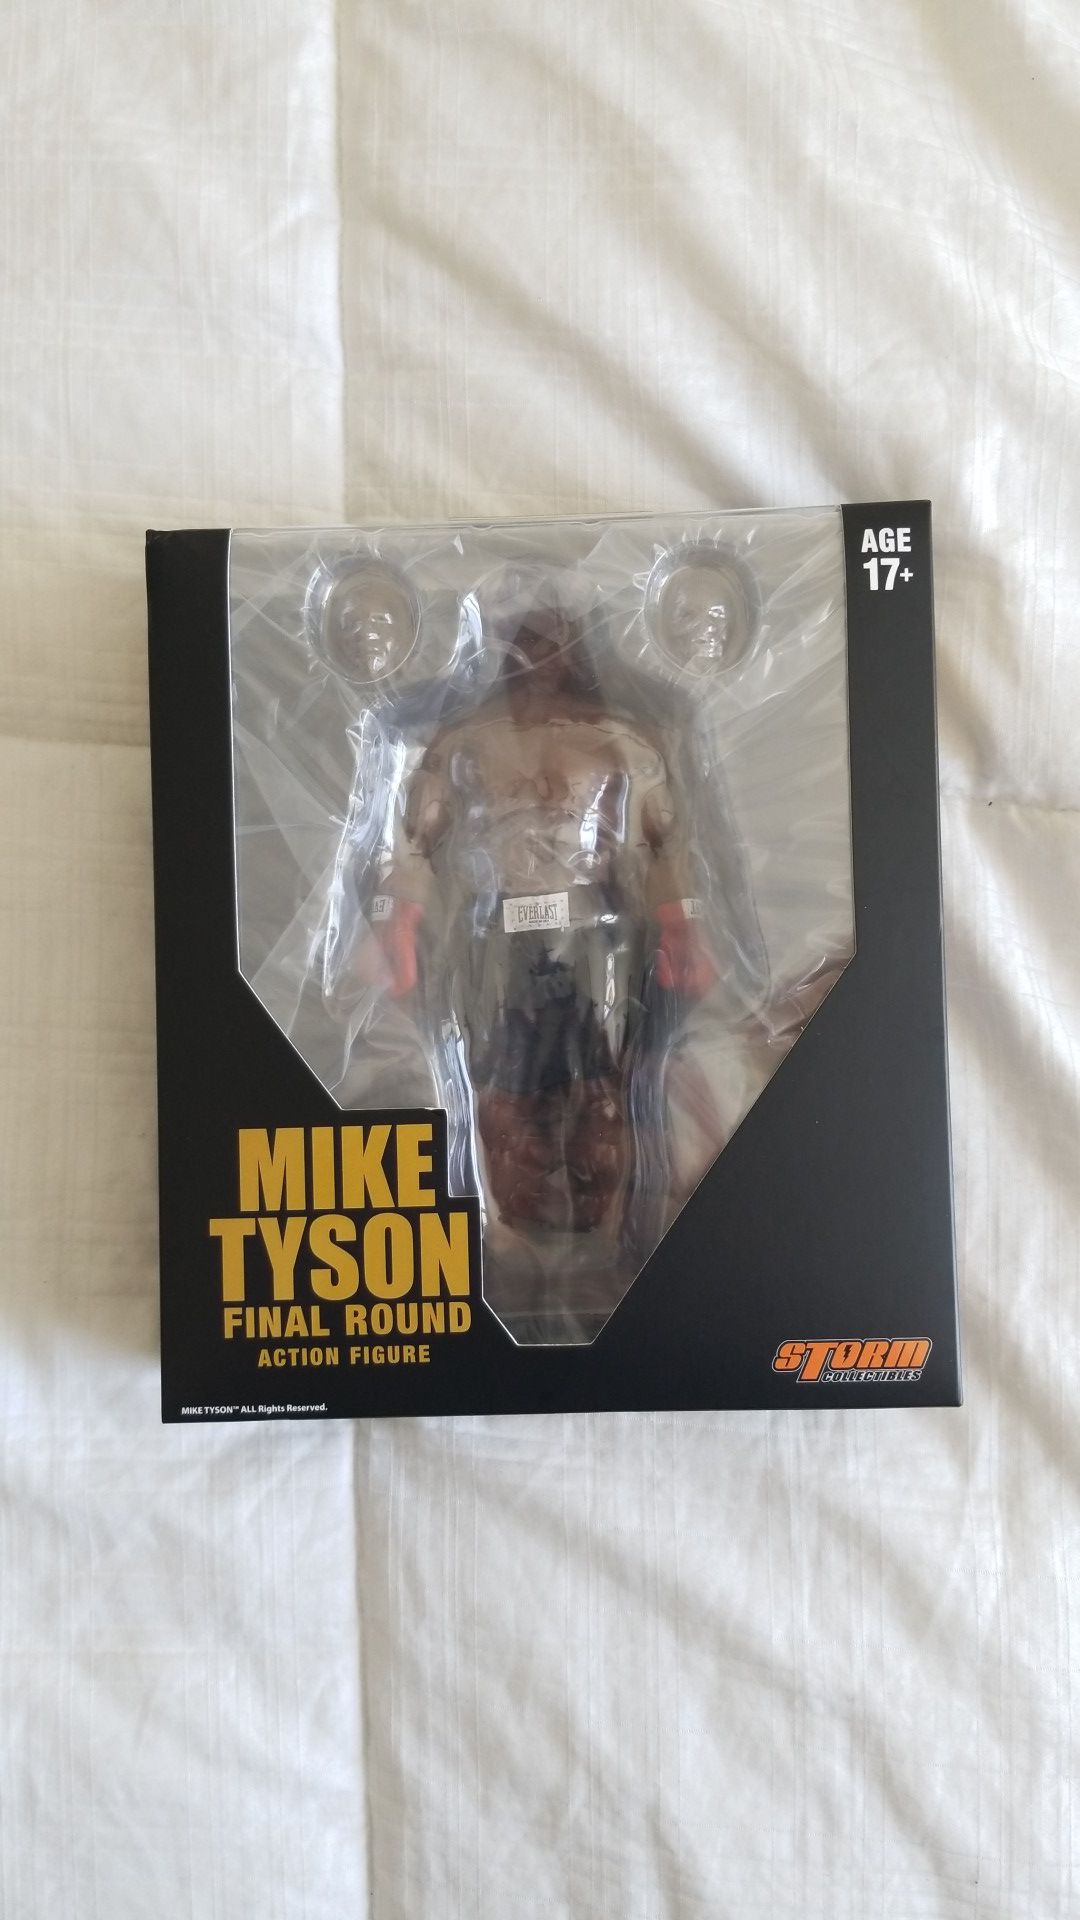 Rare Collectable NEW Mike Tyson Final Round Action Figure by Storm Collectibles